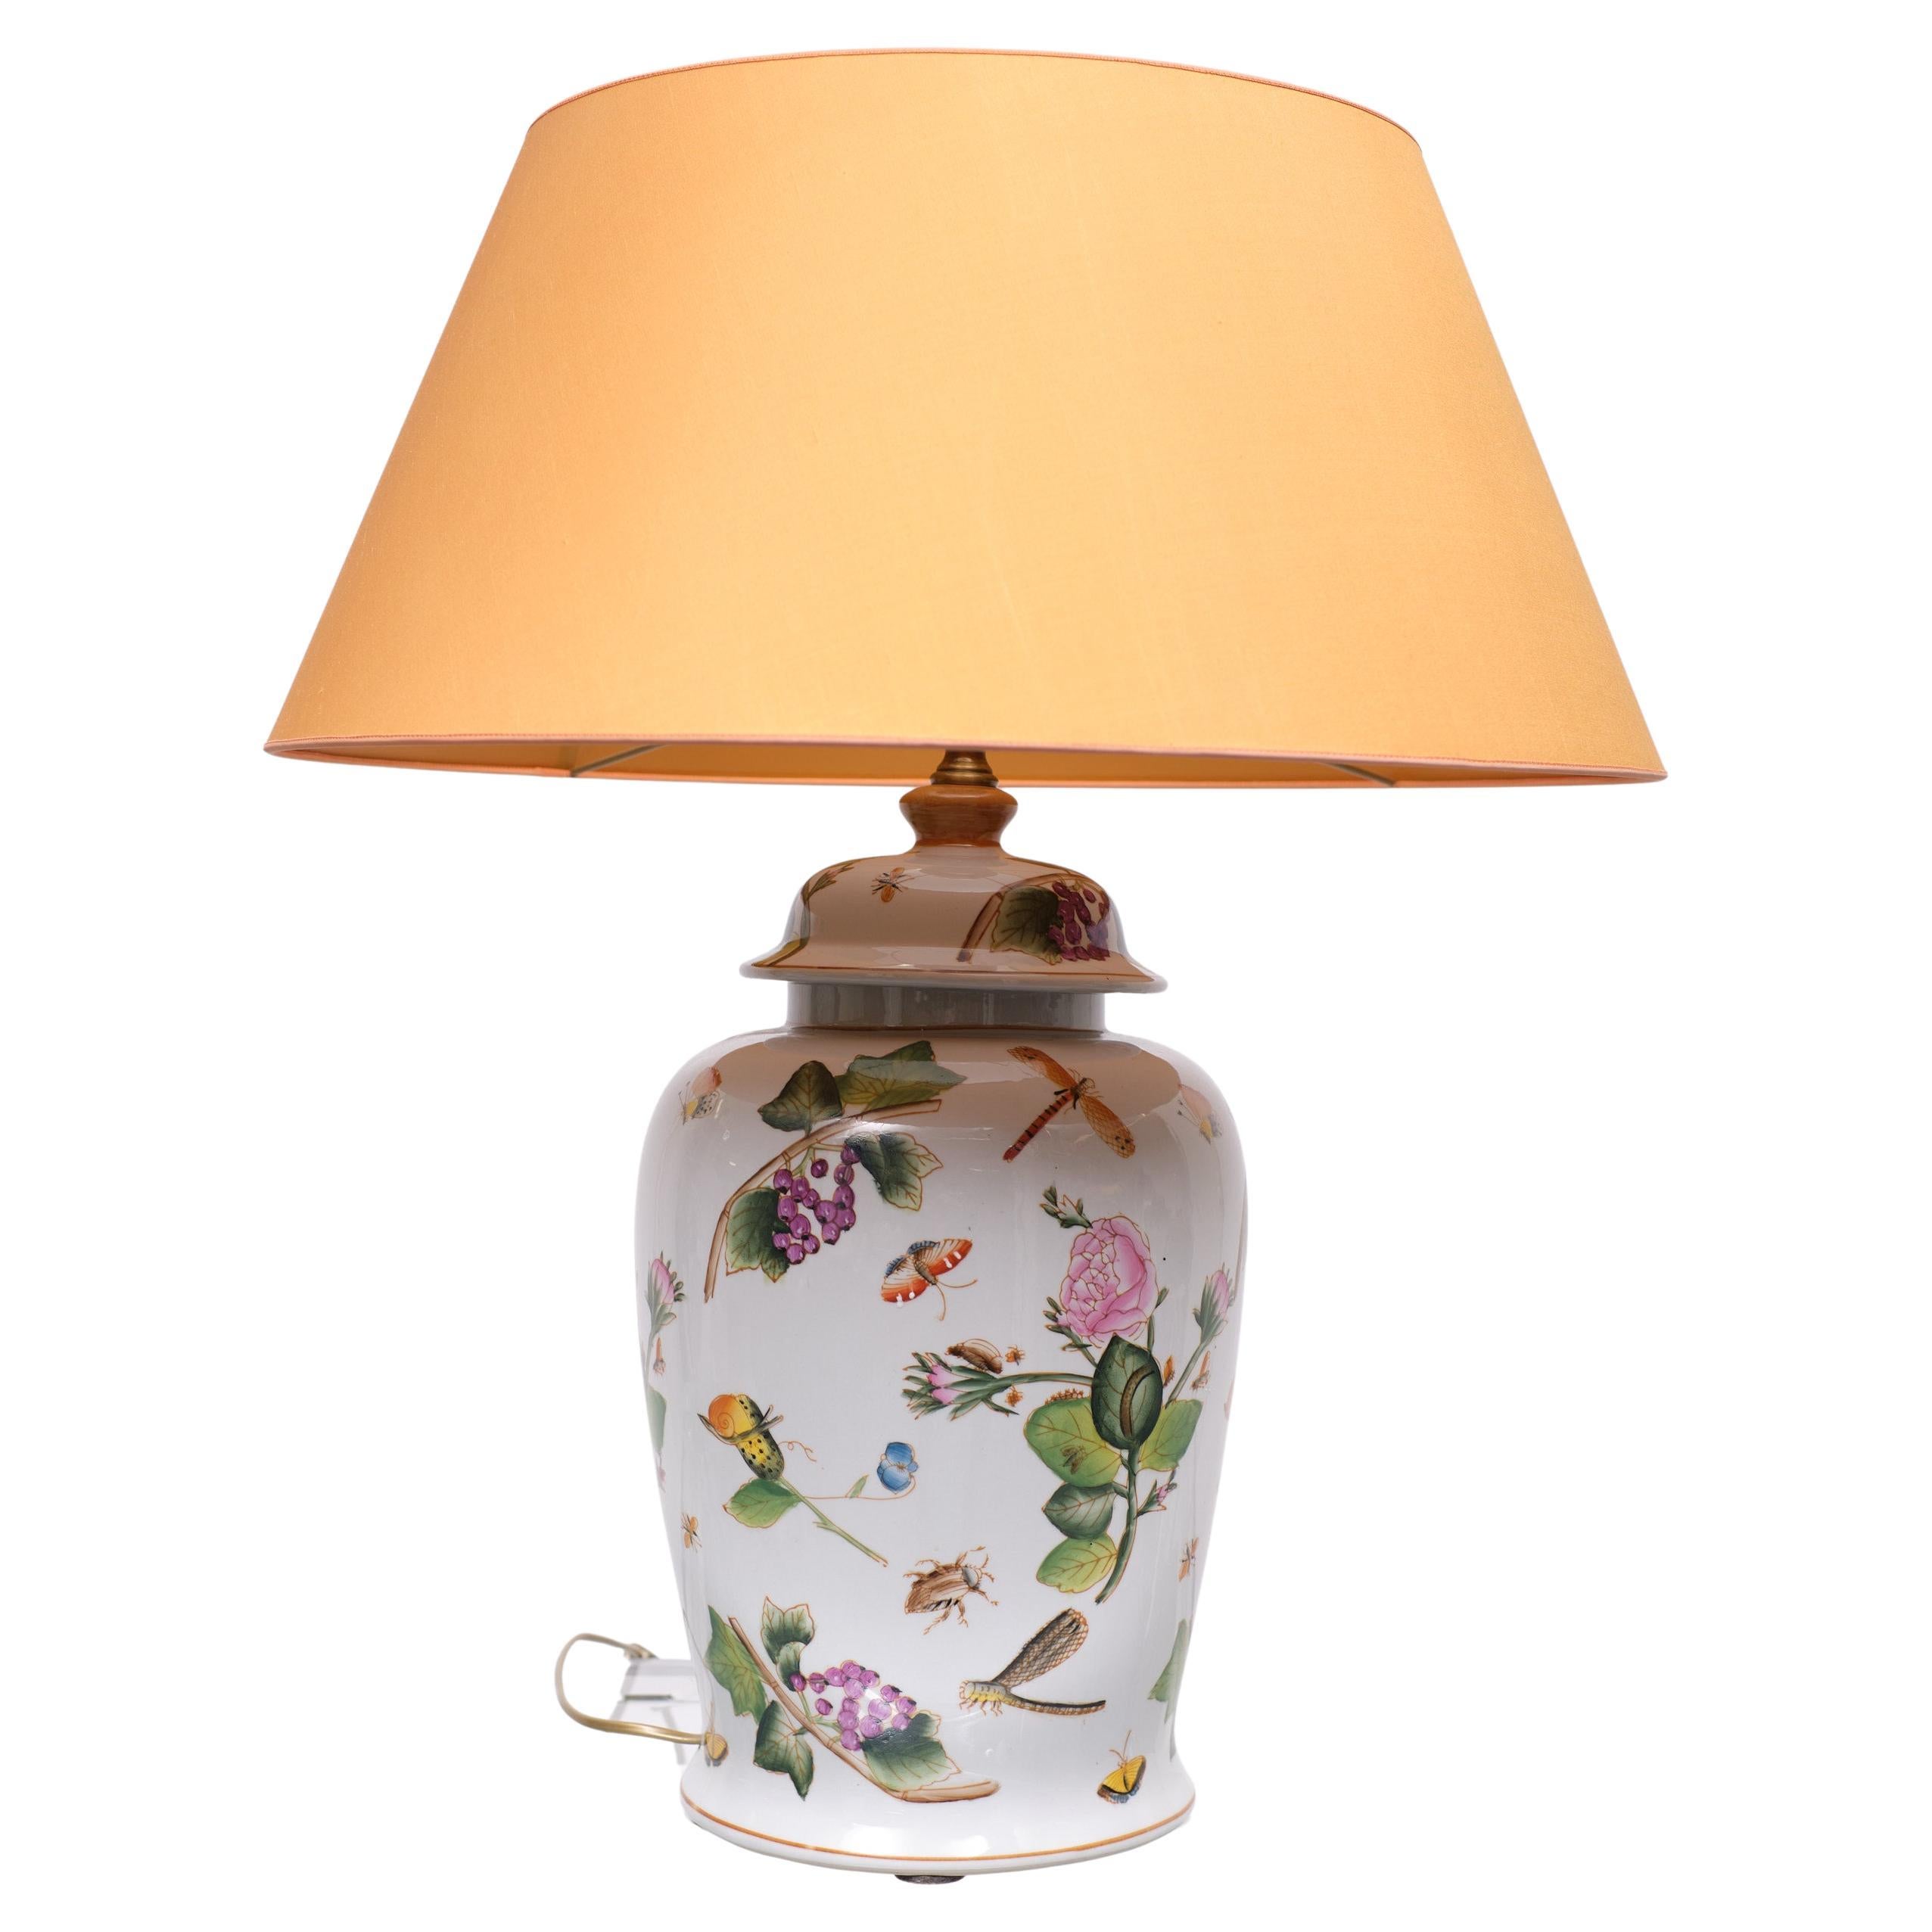 Large Classic Hand-Painted Table Lamp, Germany